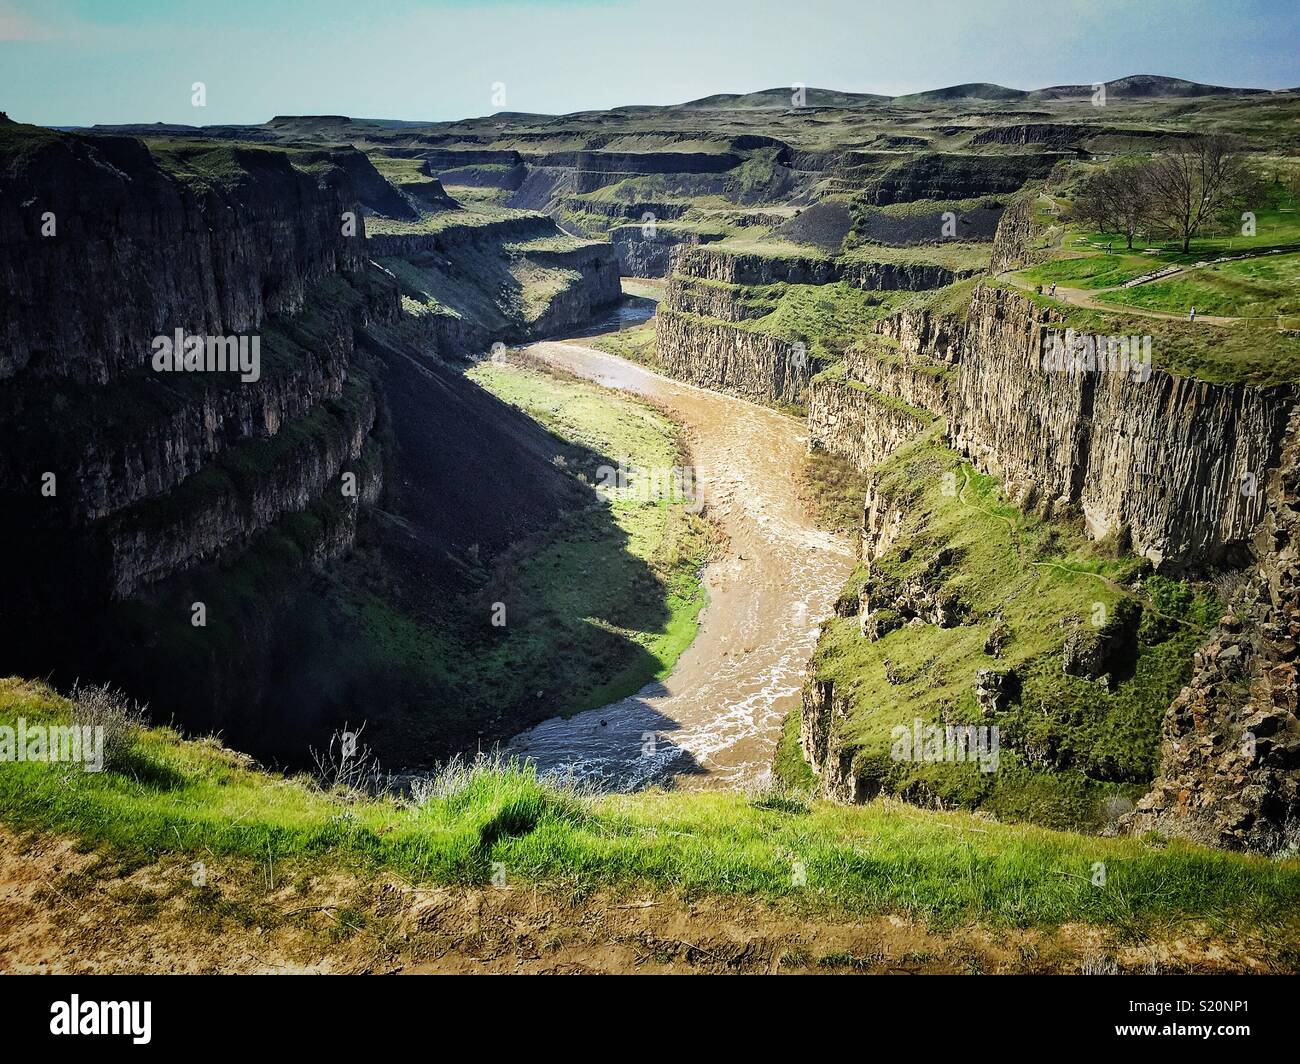 Snake river meanders through basalt canyon after dropping for Palouse falls in Washington state Stock Photo